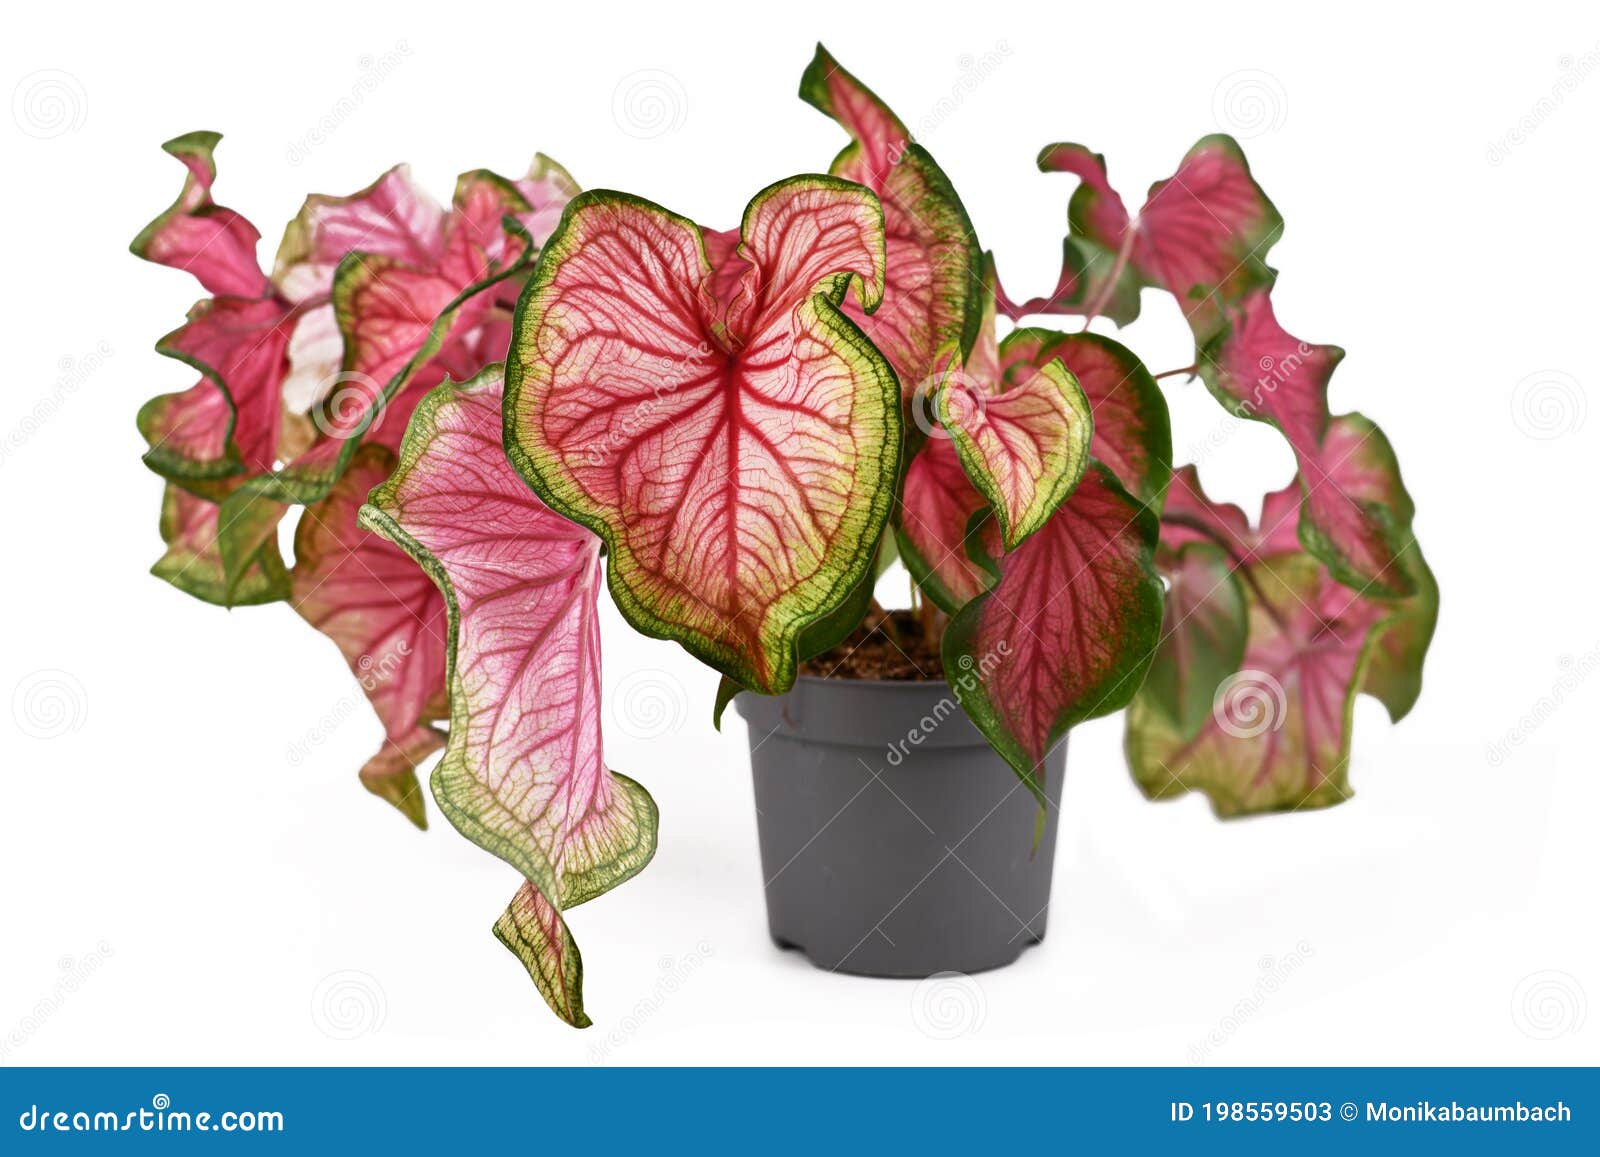 Exotic `Caladium Florida Sweetheart` Plant with Beautiful Pink and ...